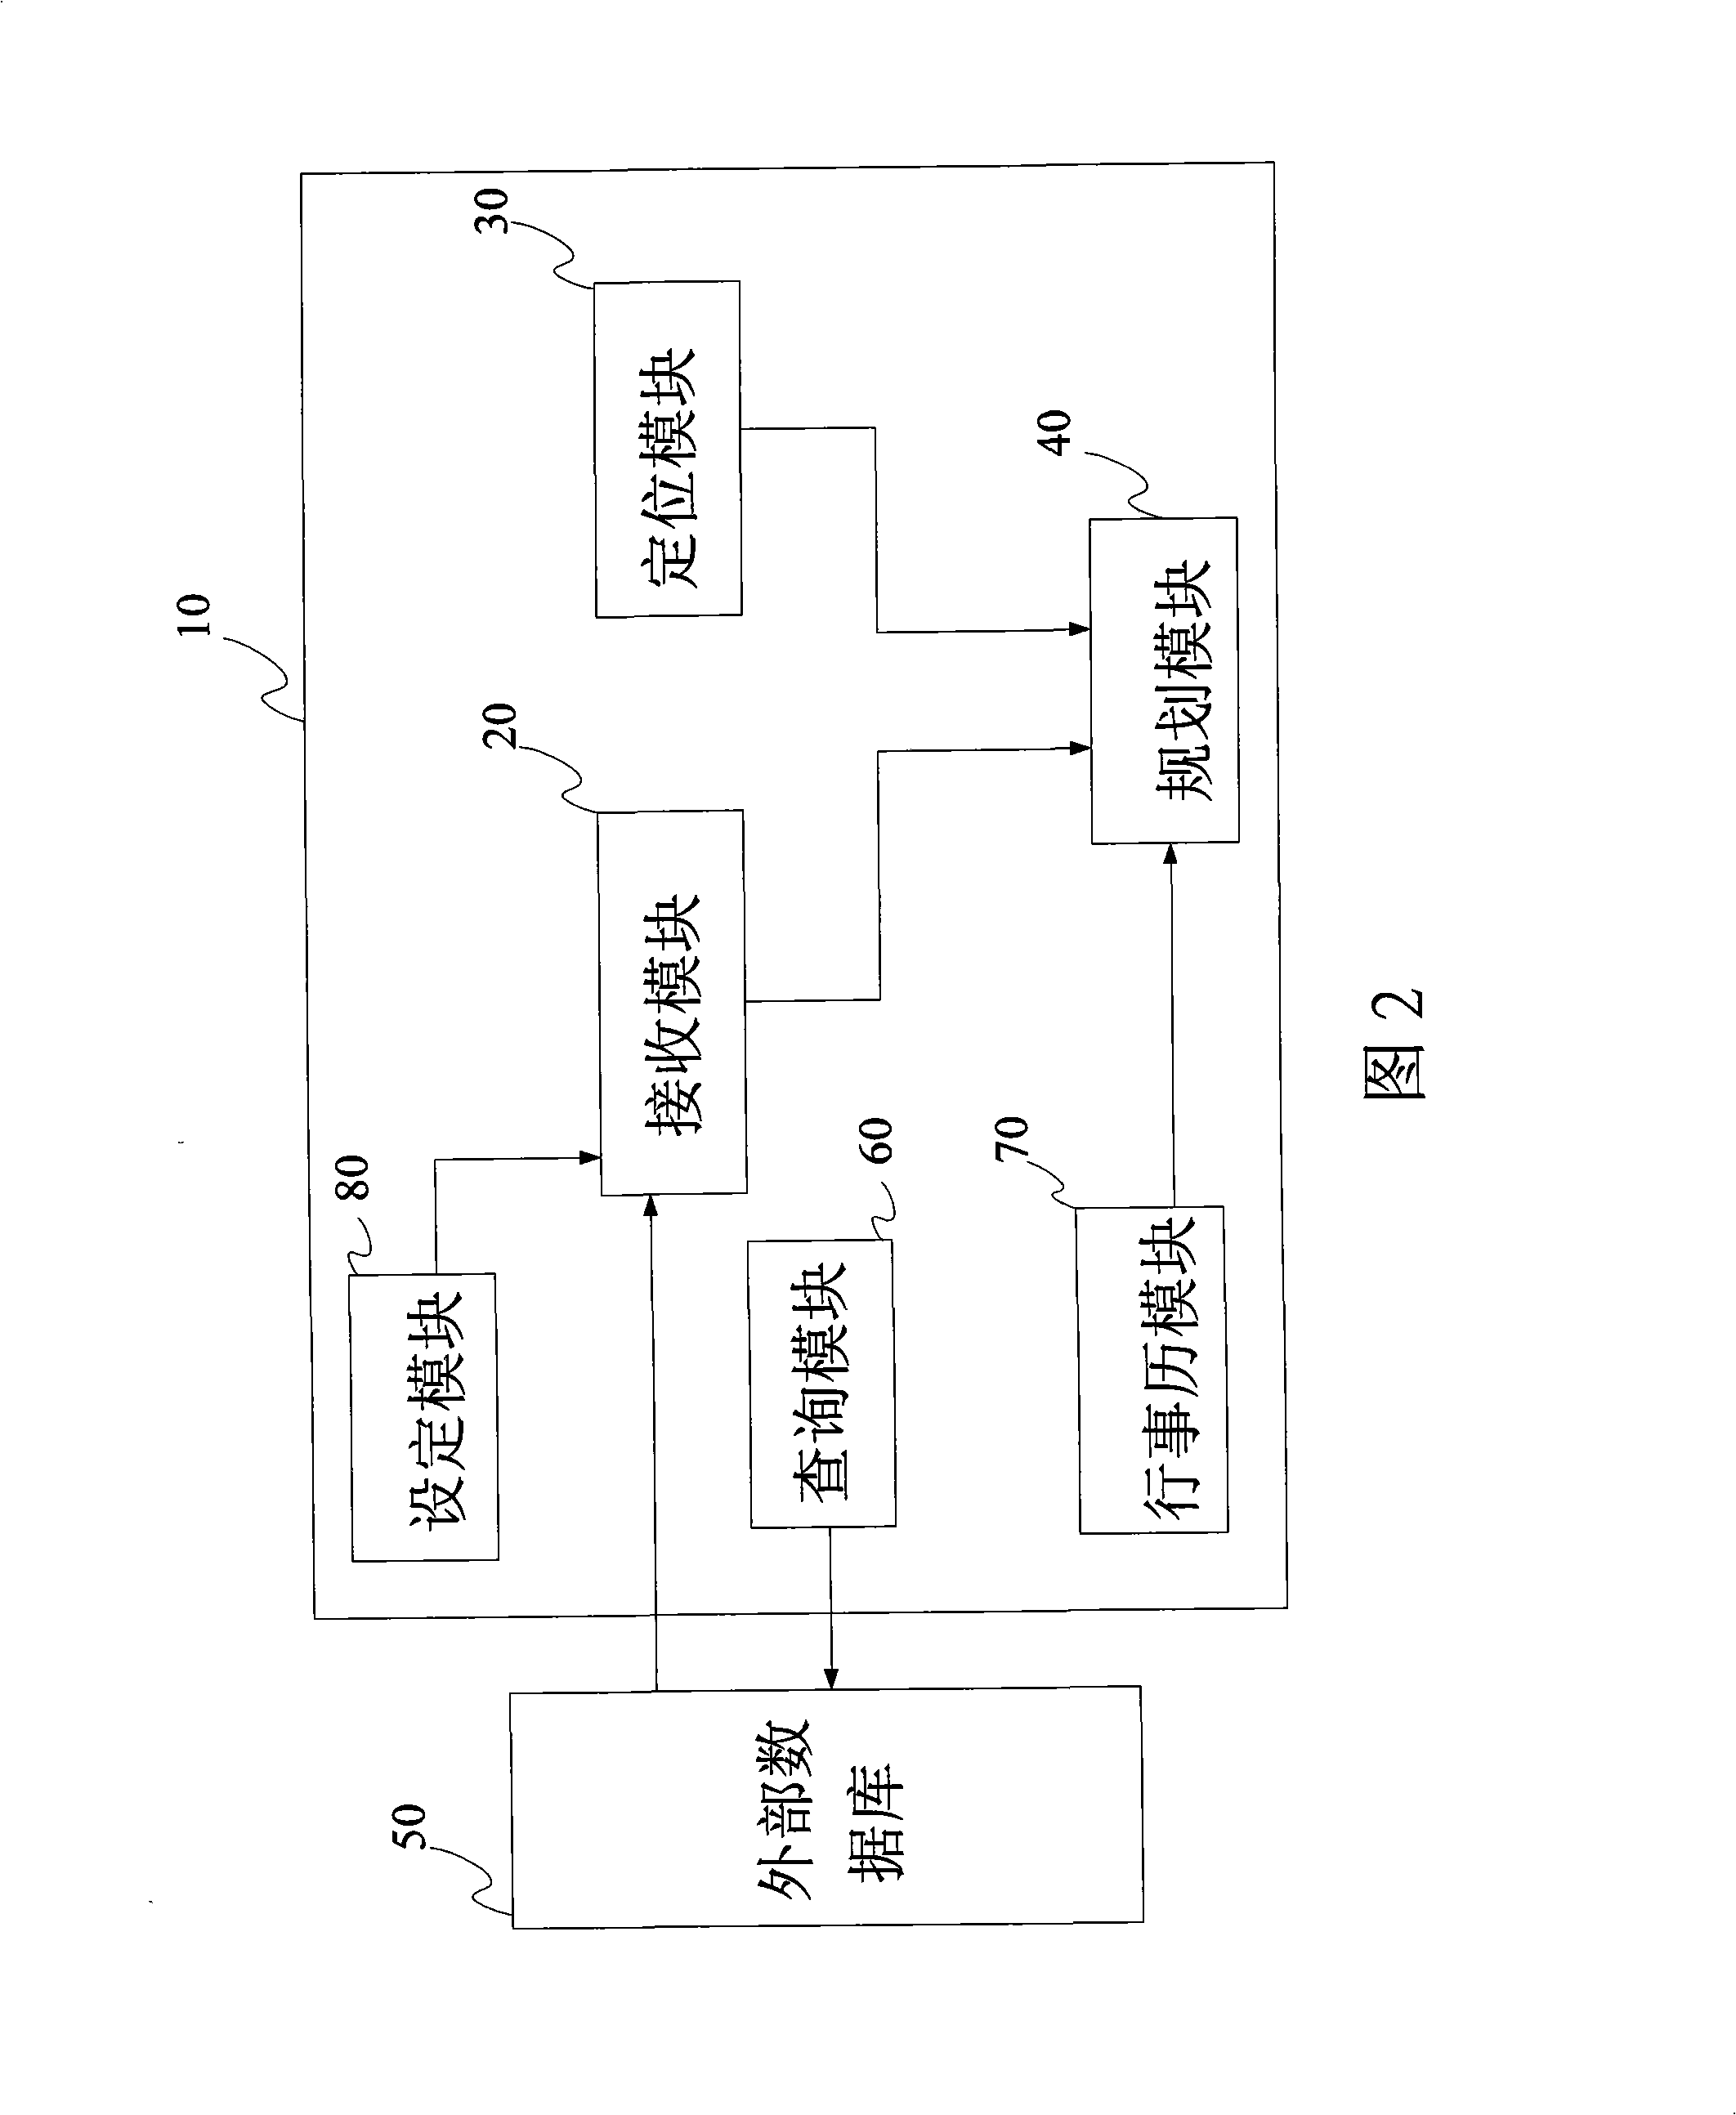 Navigation apparatus and method for combining movement information